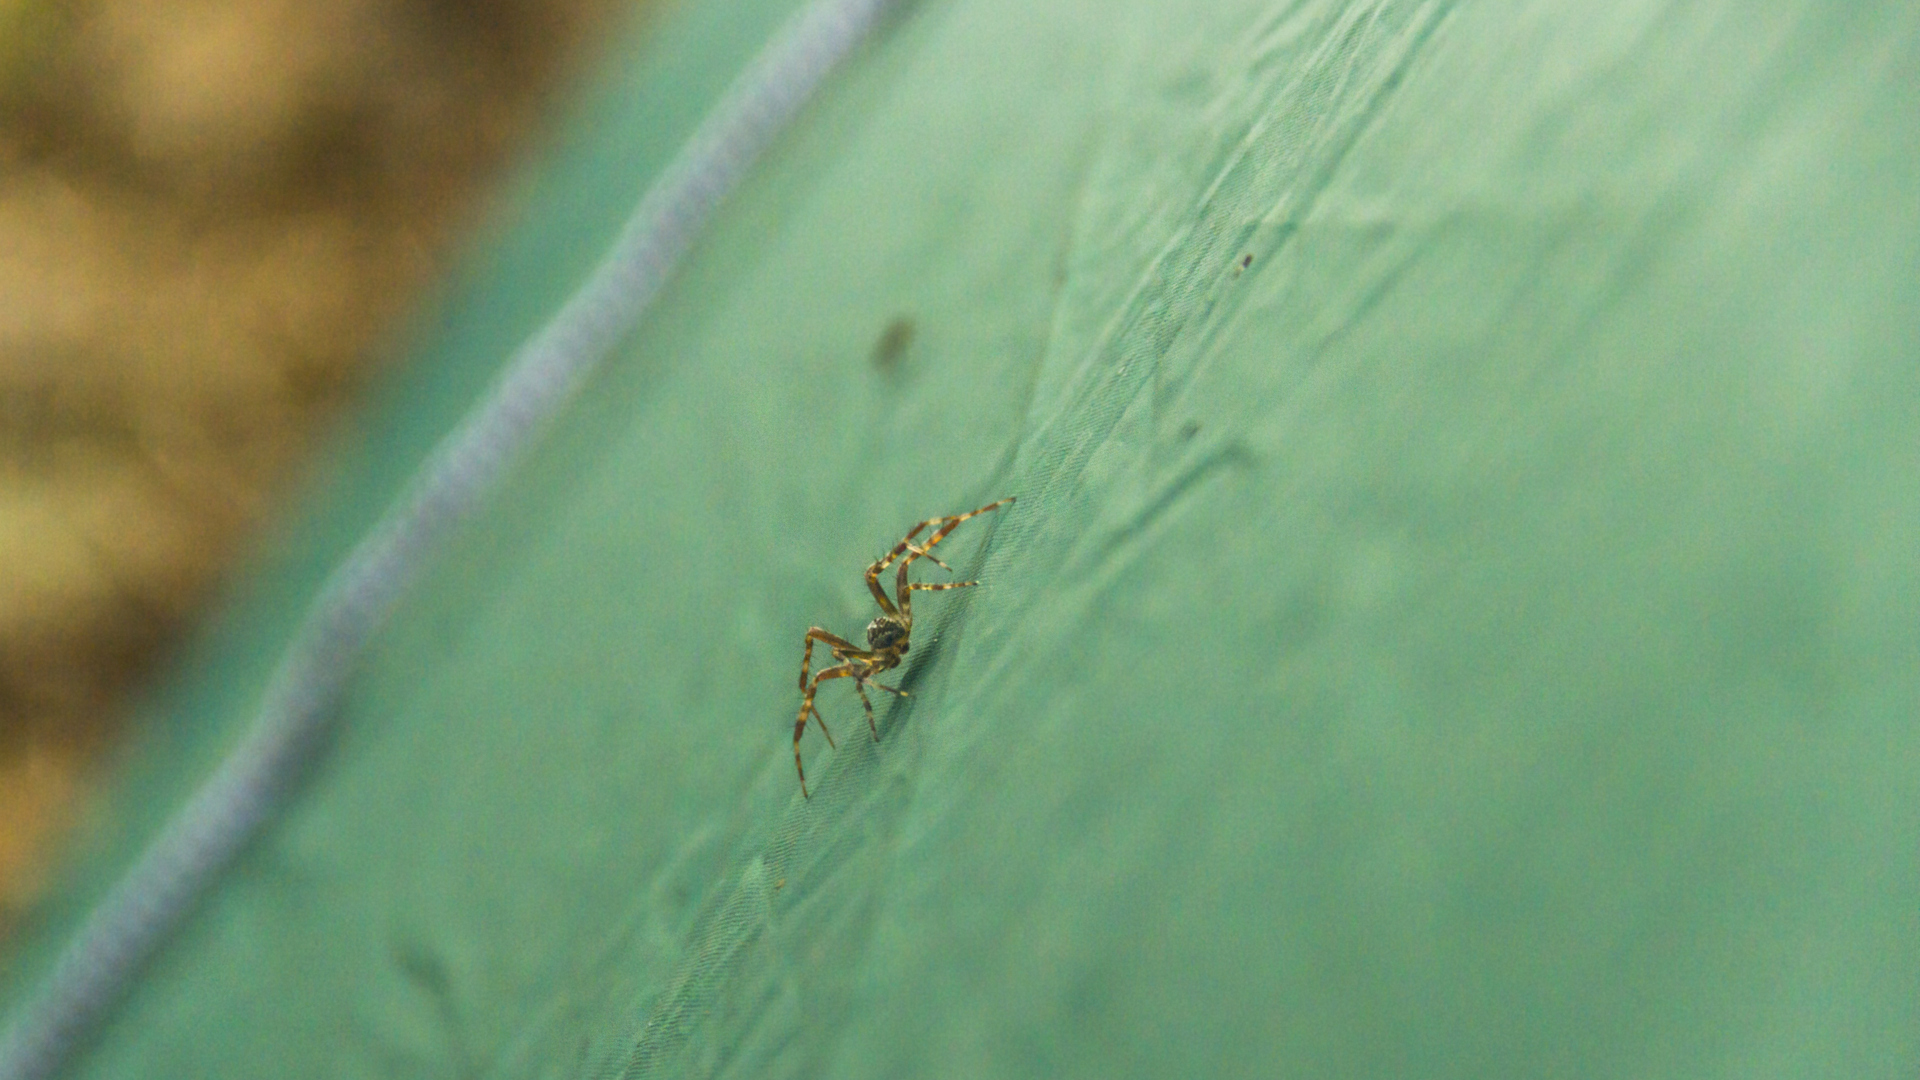 a small spider on the green tourist tent